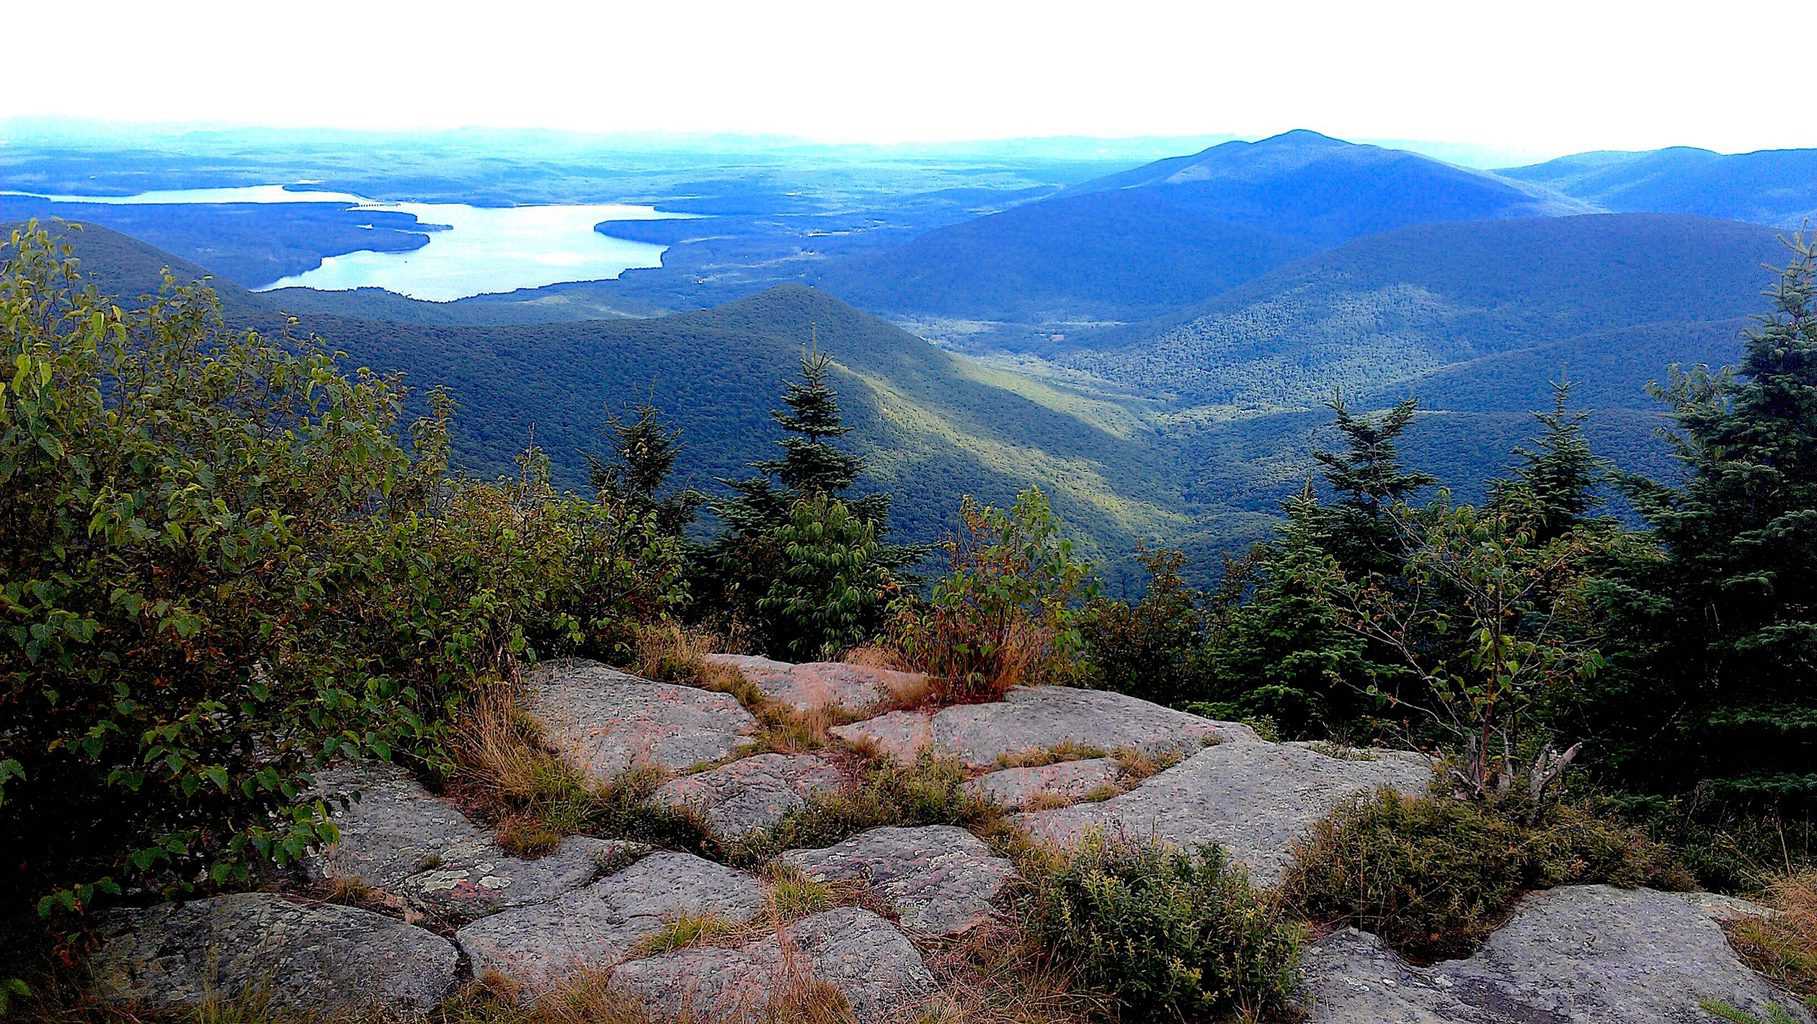 The view from the top of Wittenberg Mountain in the Catskills, NY - one of the best hikes in upstate New York.